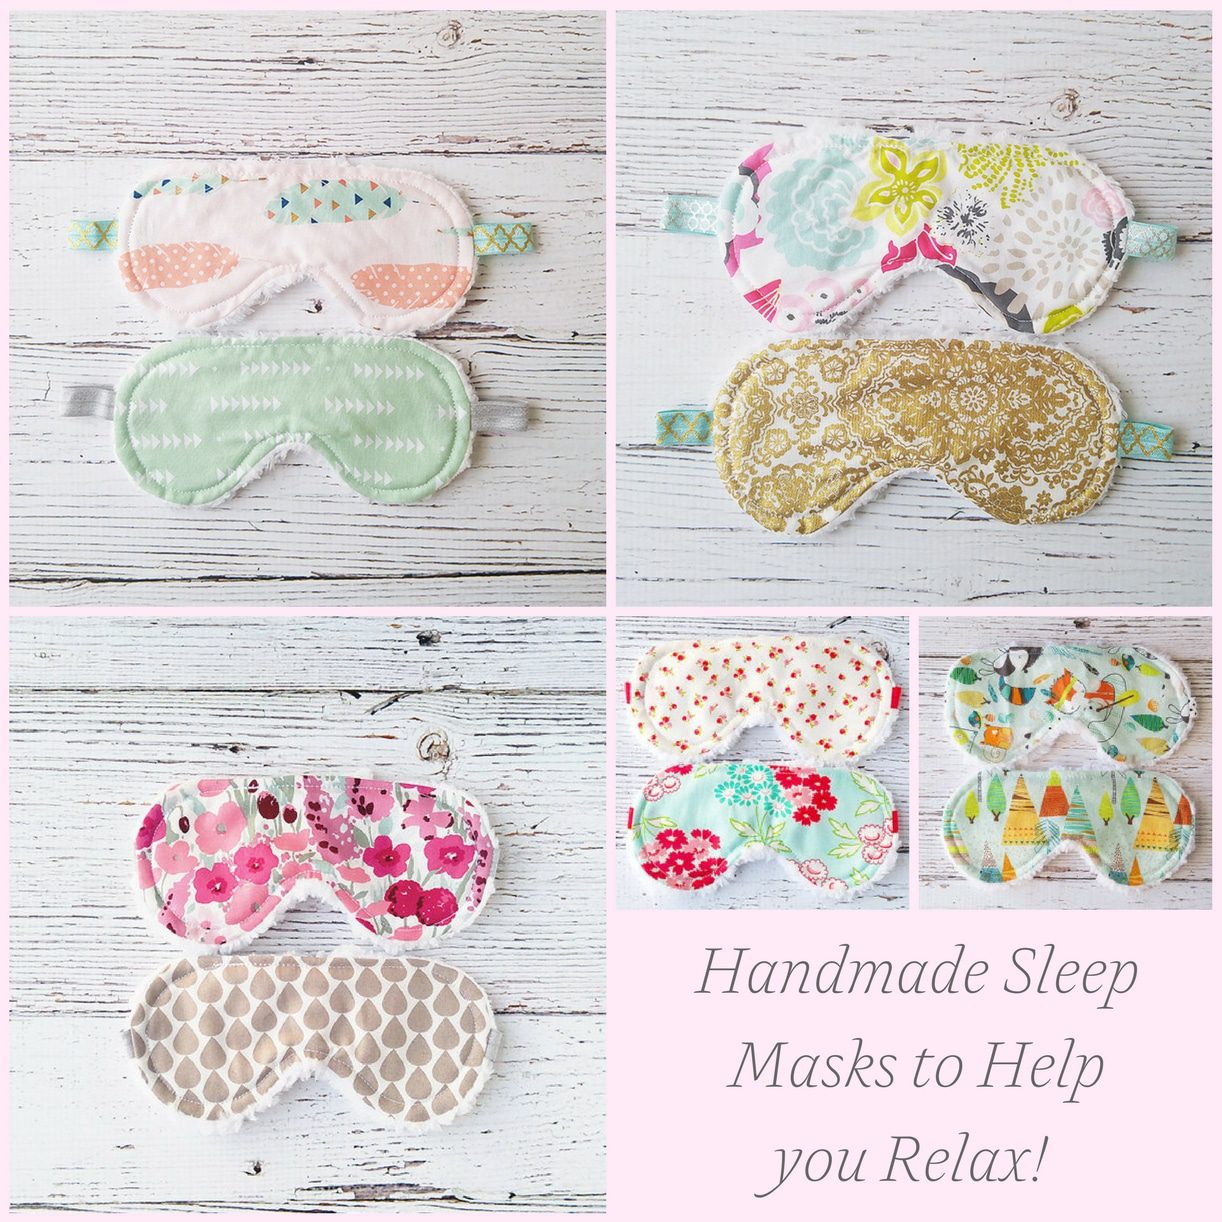 Handmade Sleep Masks to Help You Relax from Etsy as seen on Hill City Bride Virginia Wedding Blog